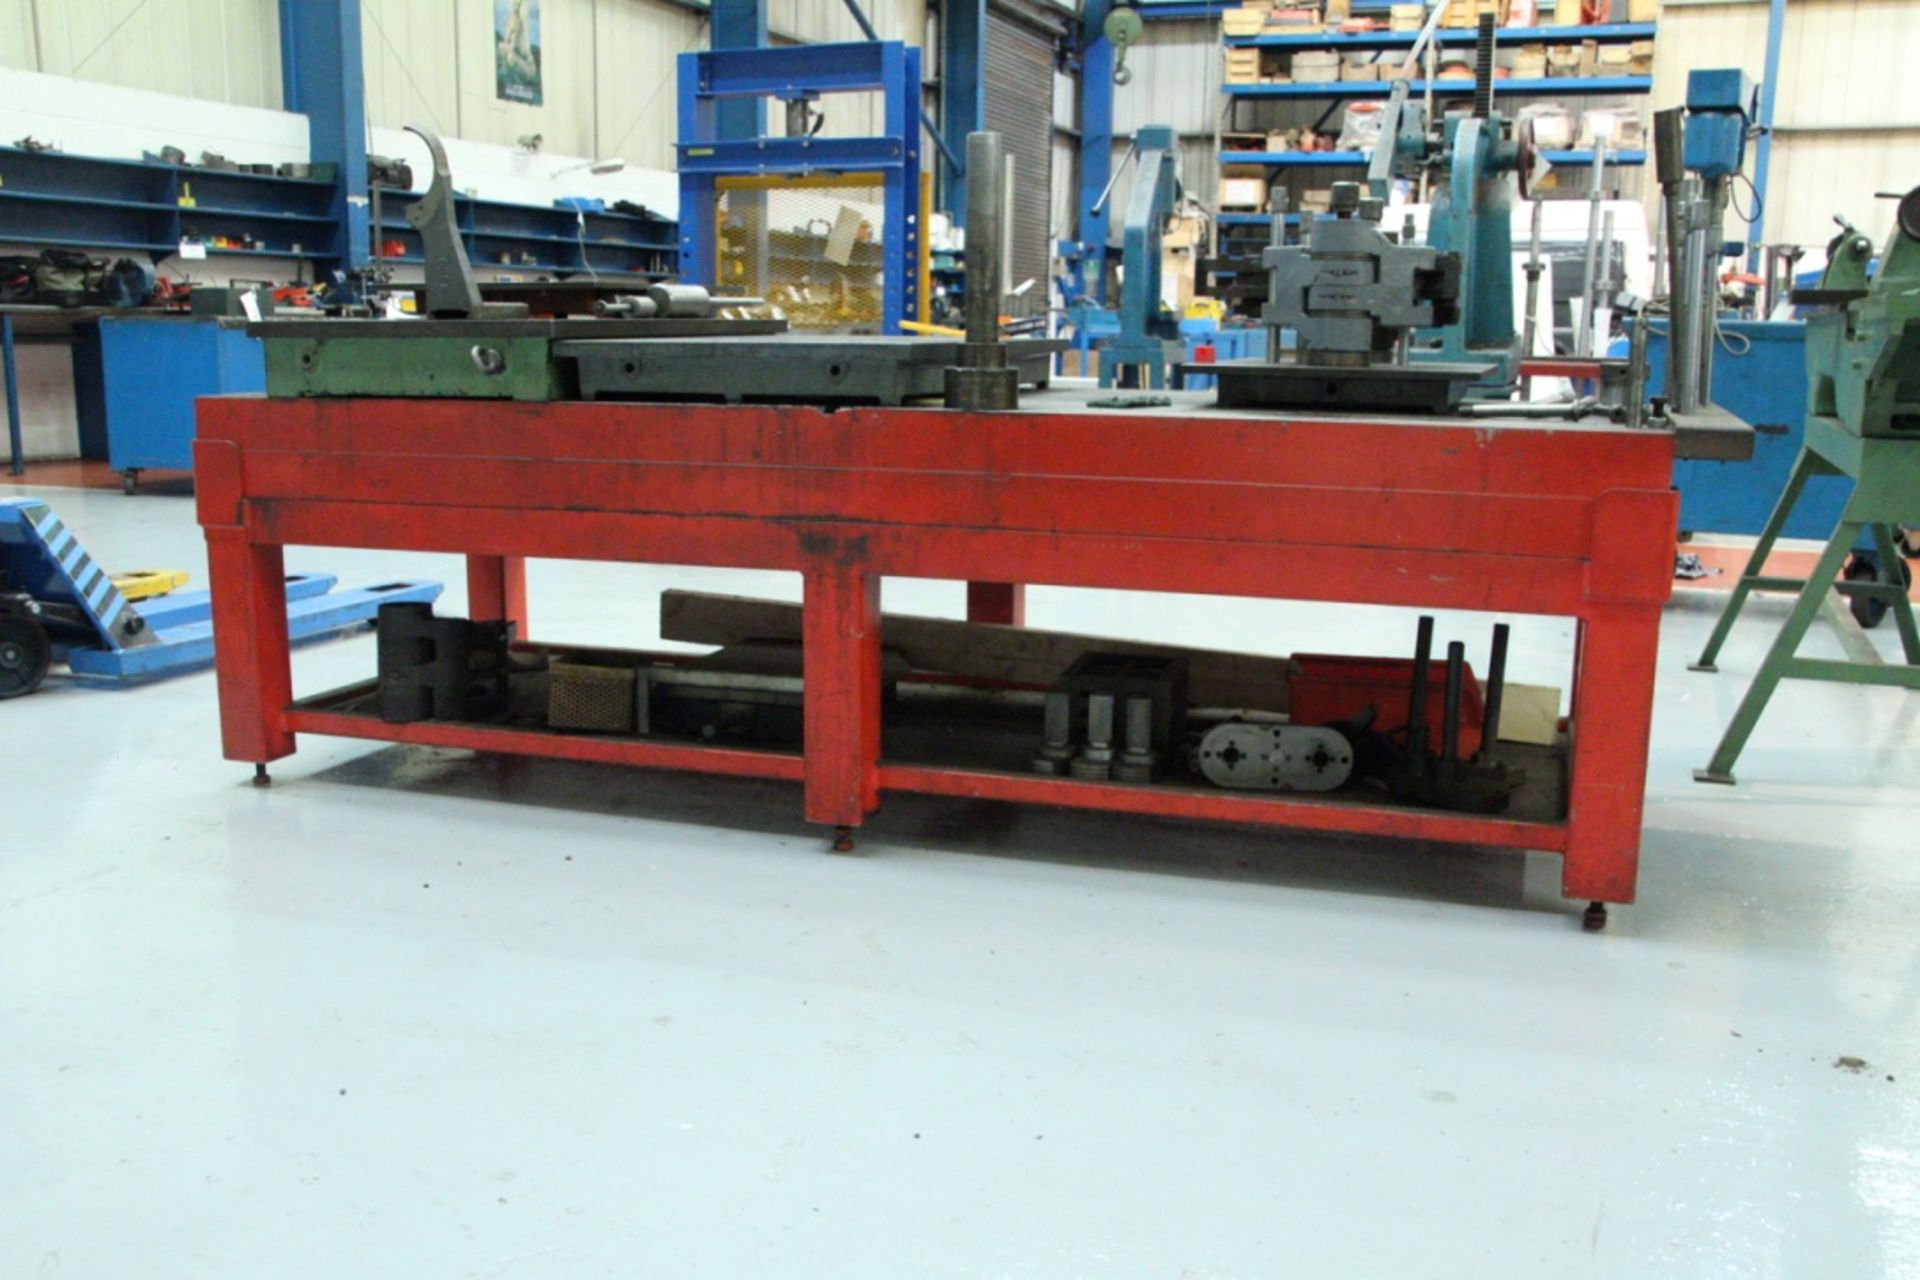 T-SLOTTED TABLE, approx. 2.43m x 915mm, with steel stand (excluding contents) - Image 3 of 3